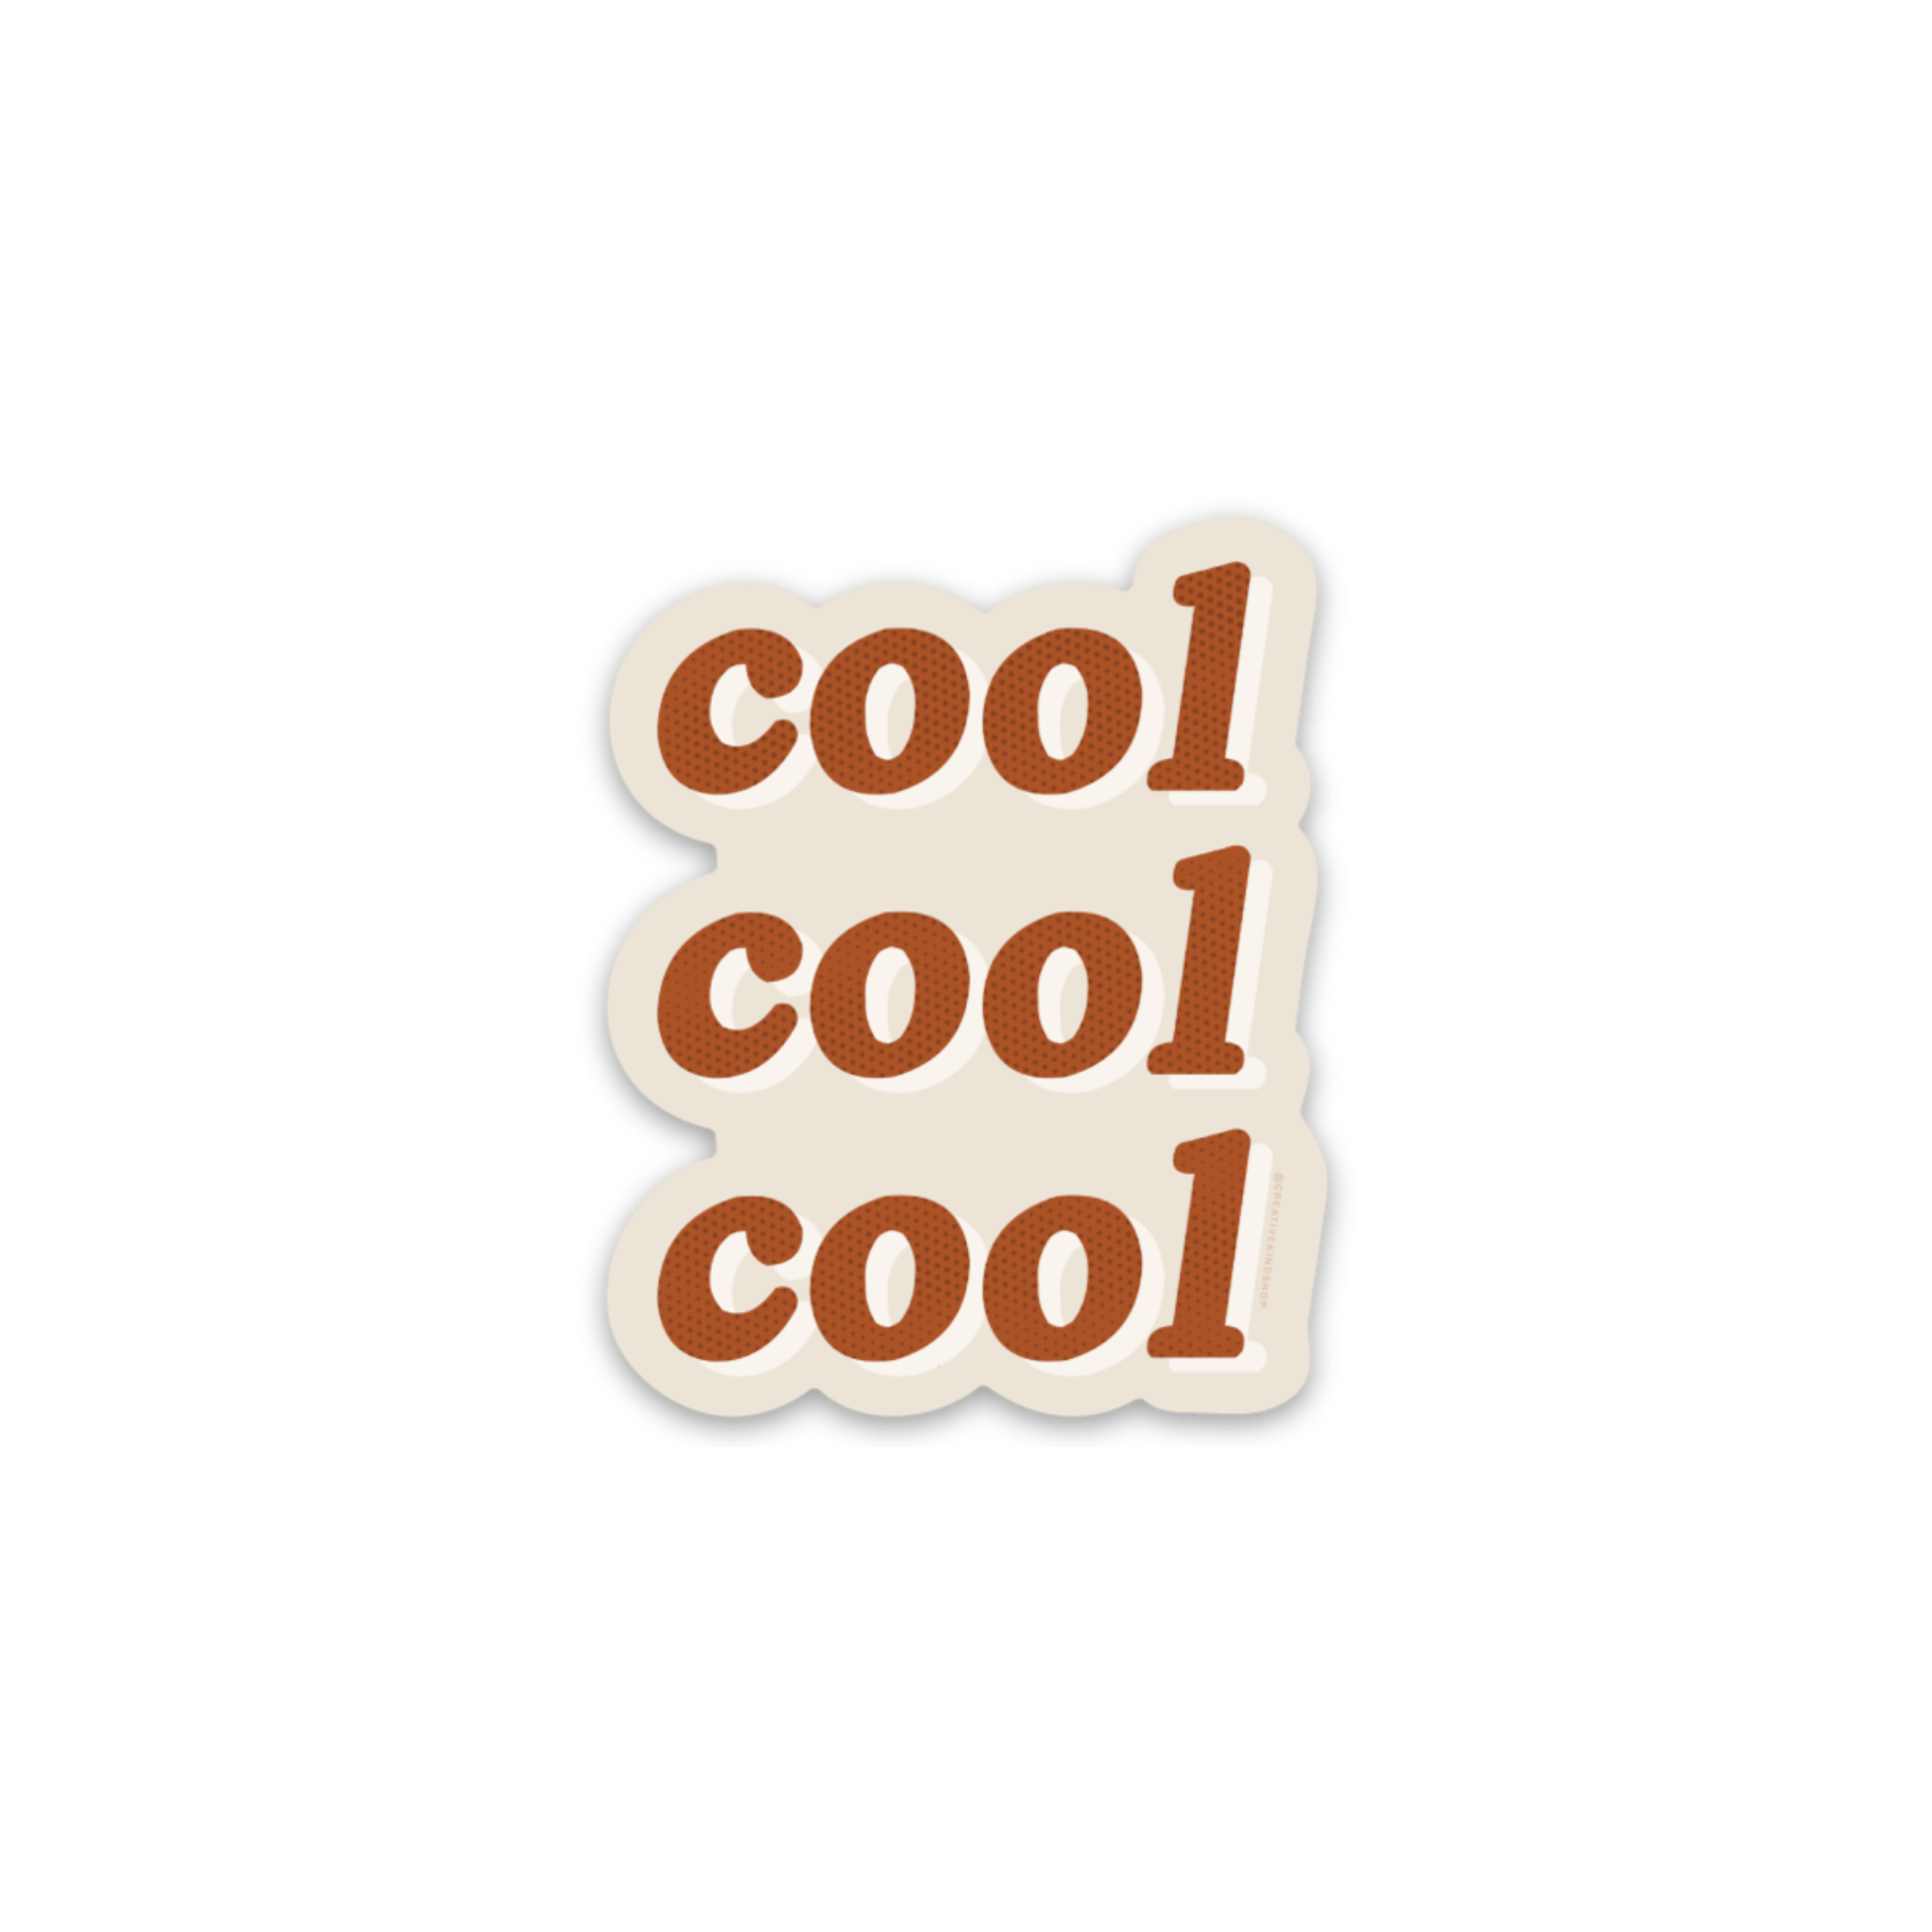 Die cut sticker of the words "cool cool cool" in tan and brown